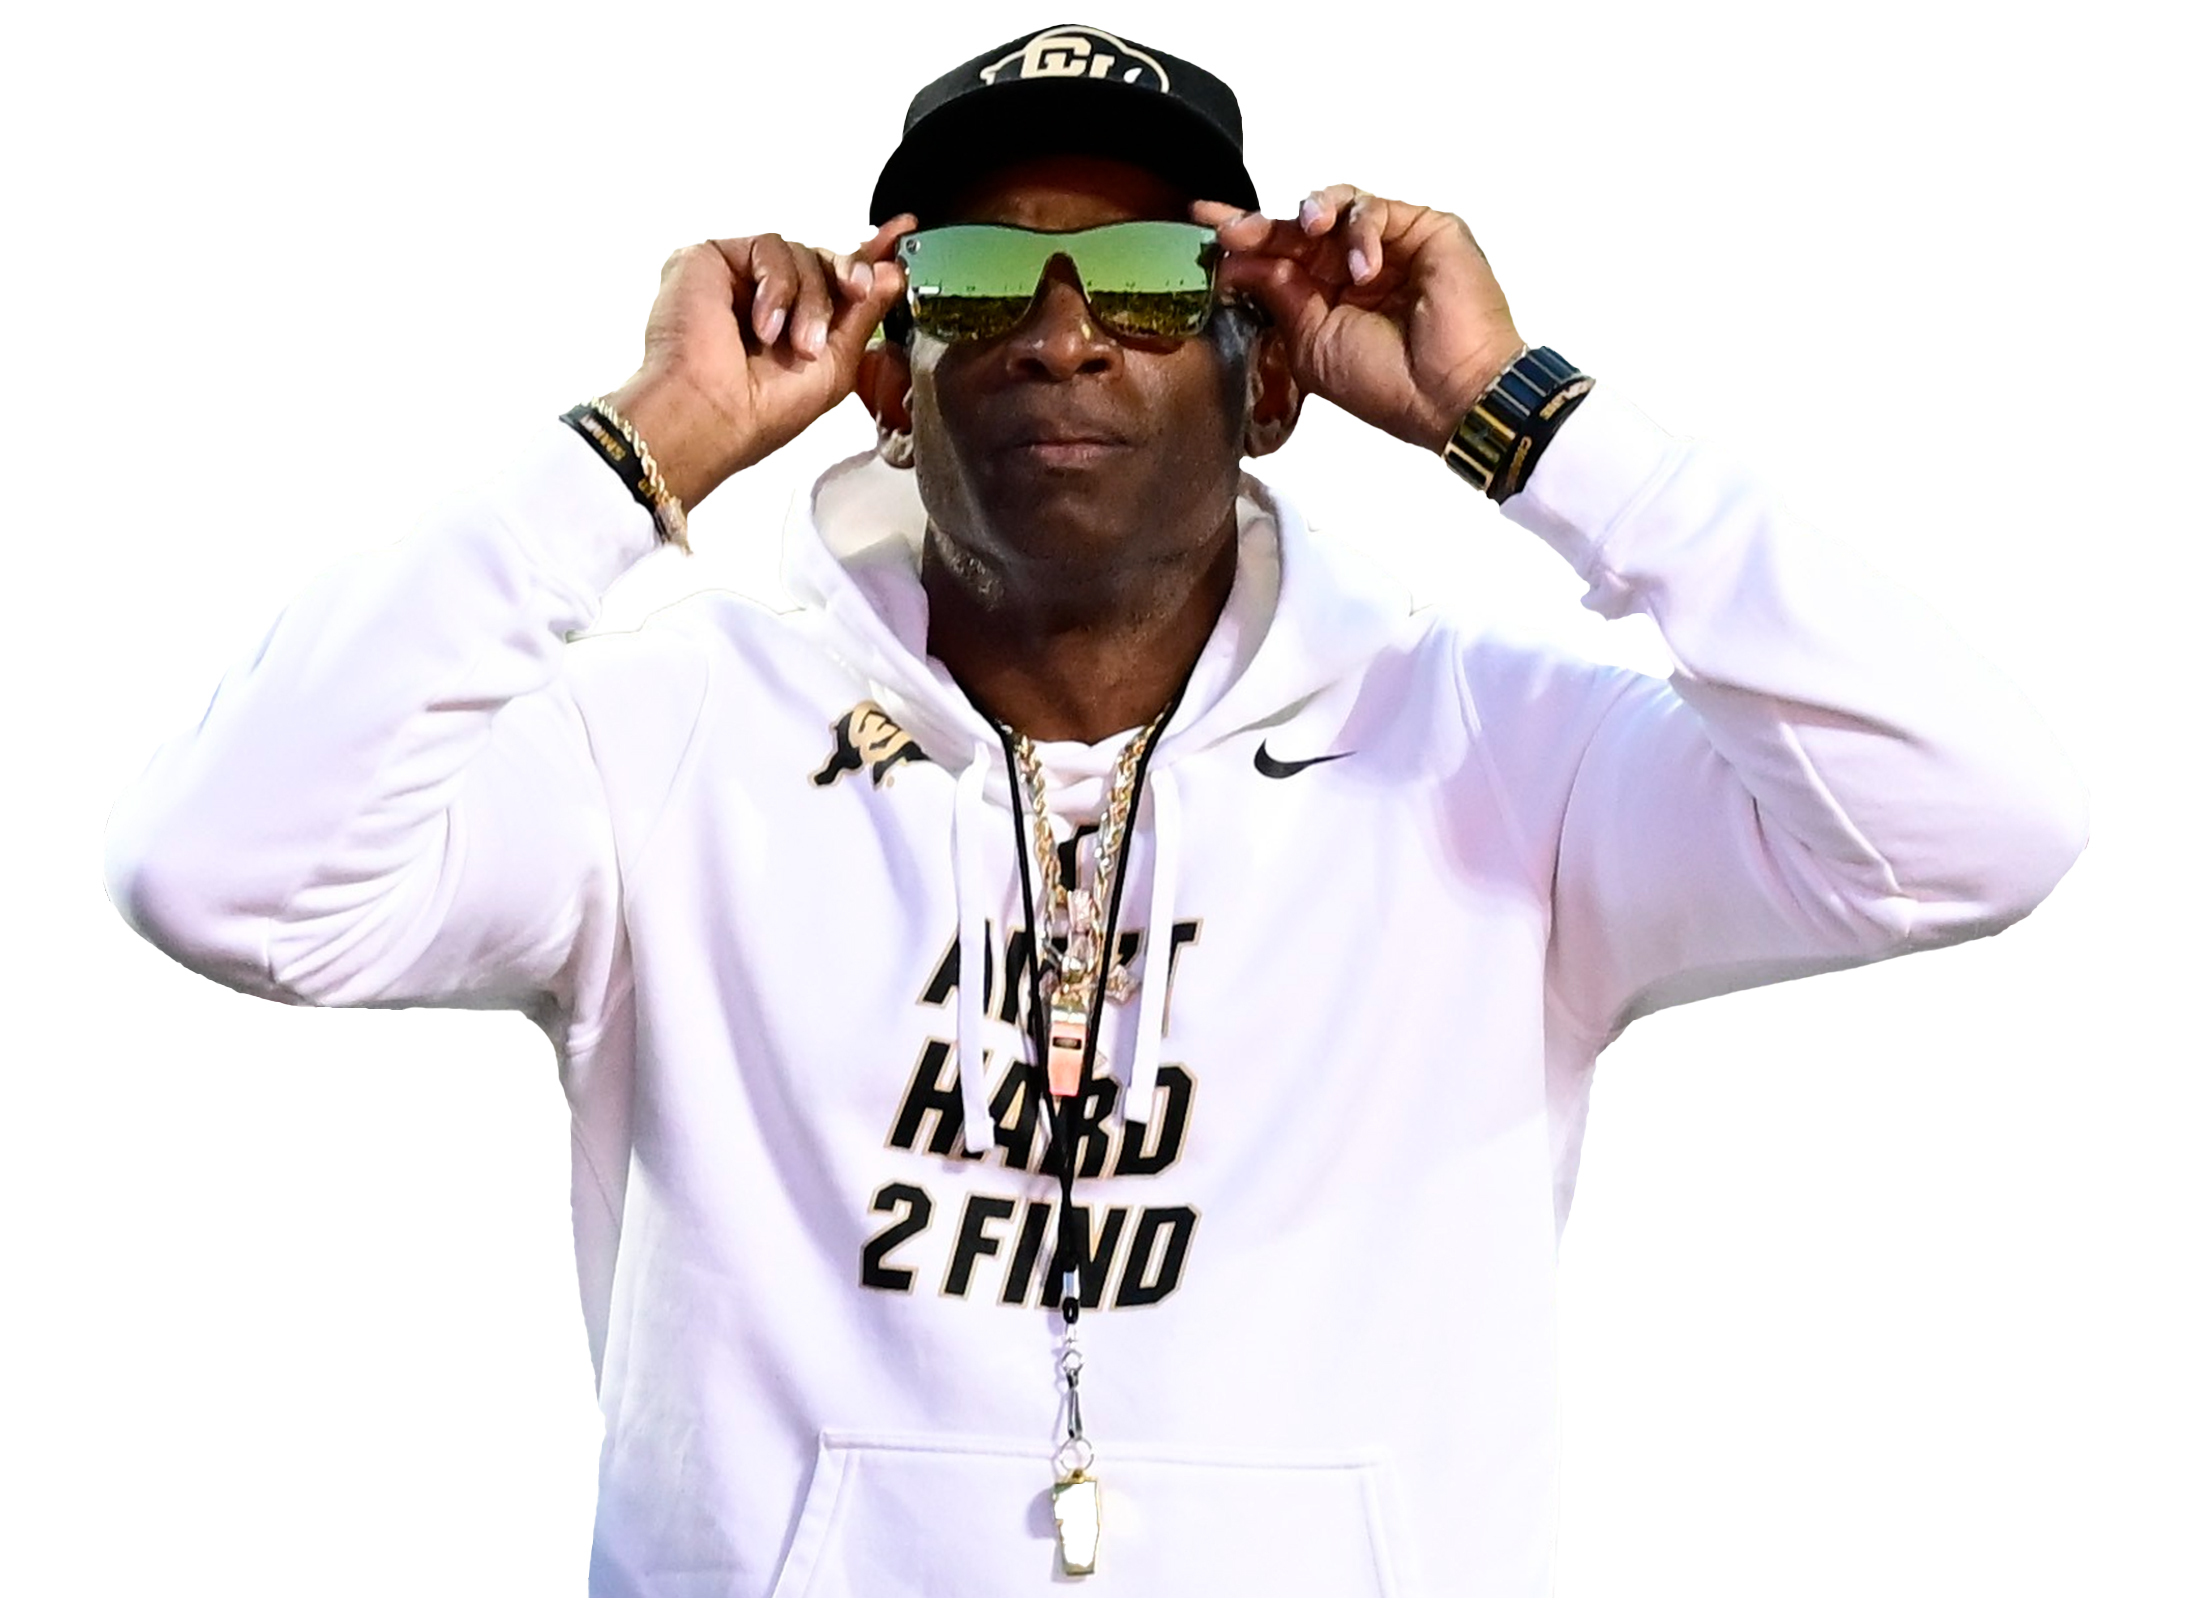 Deion Sanders' 'Prime' sunglasses bring in almost $5 million in first three  days of presale orders: report